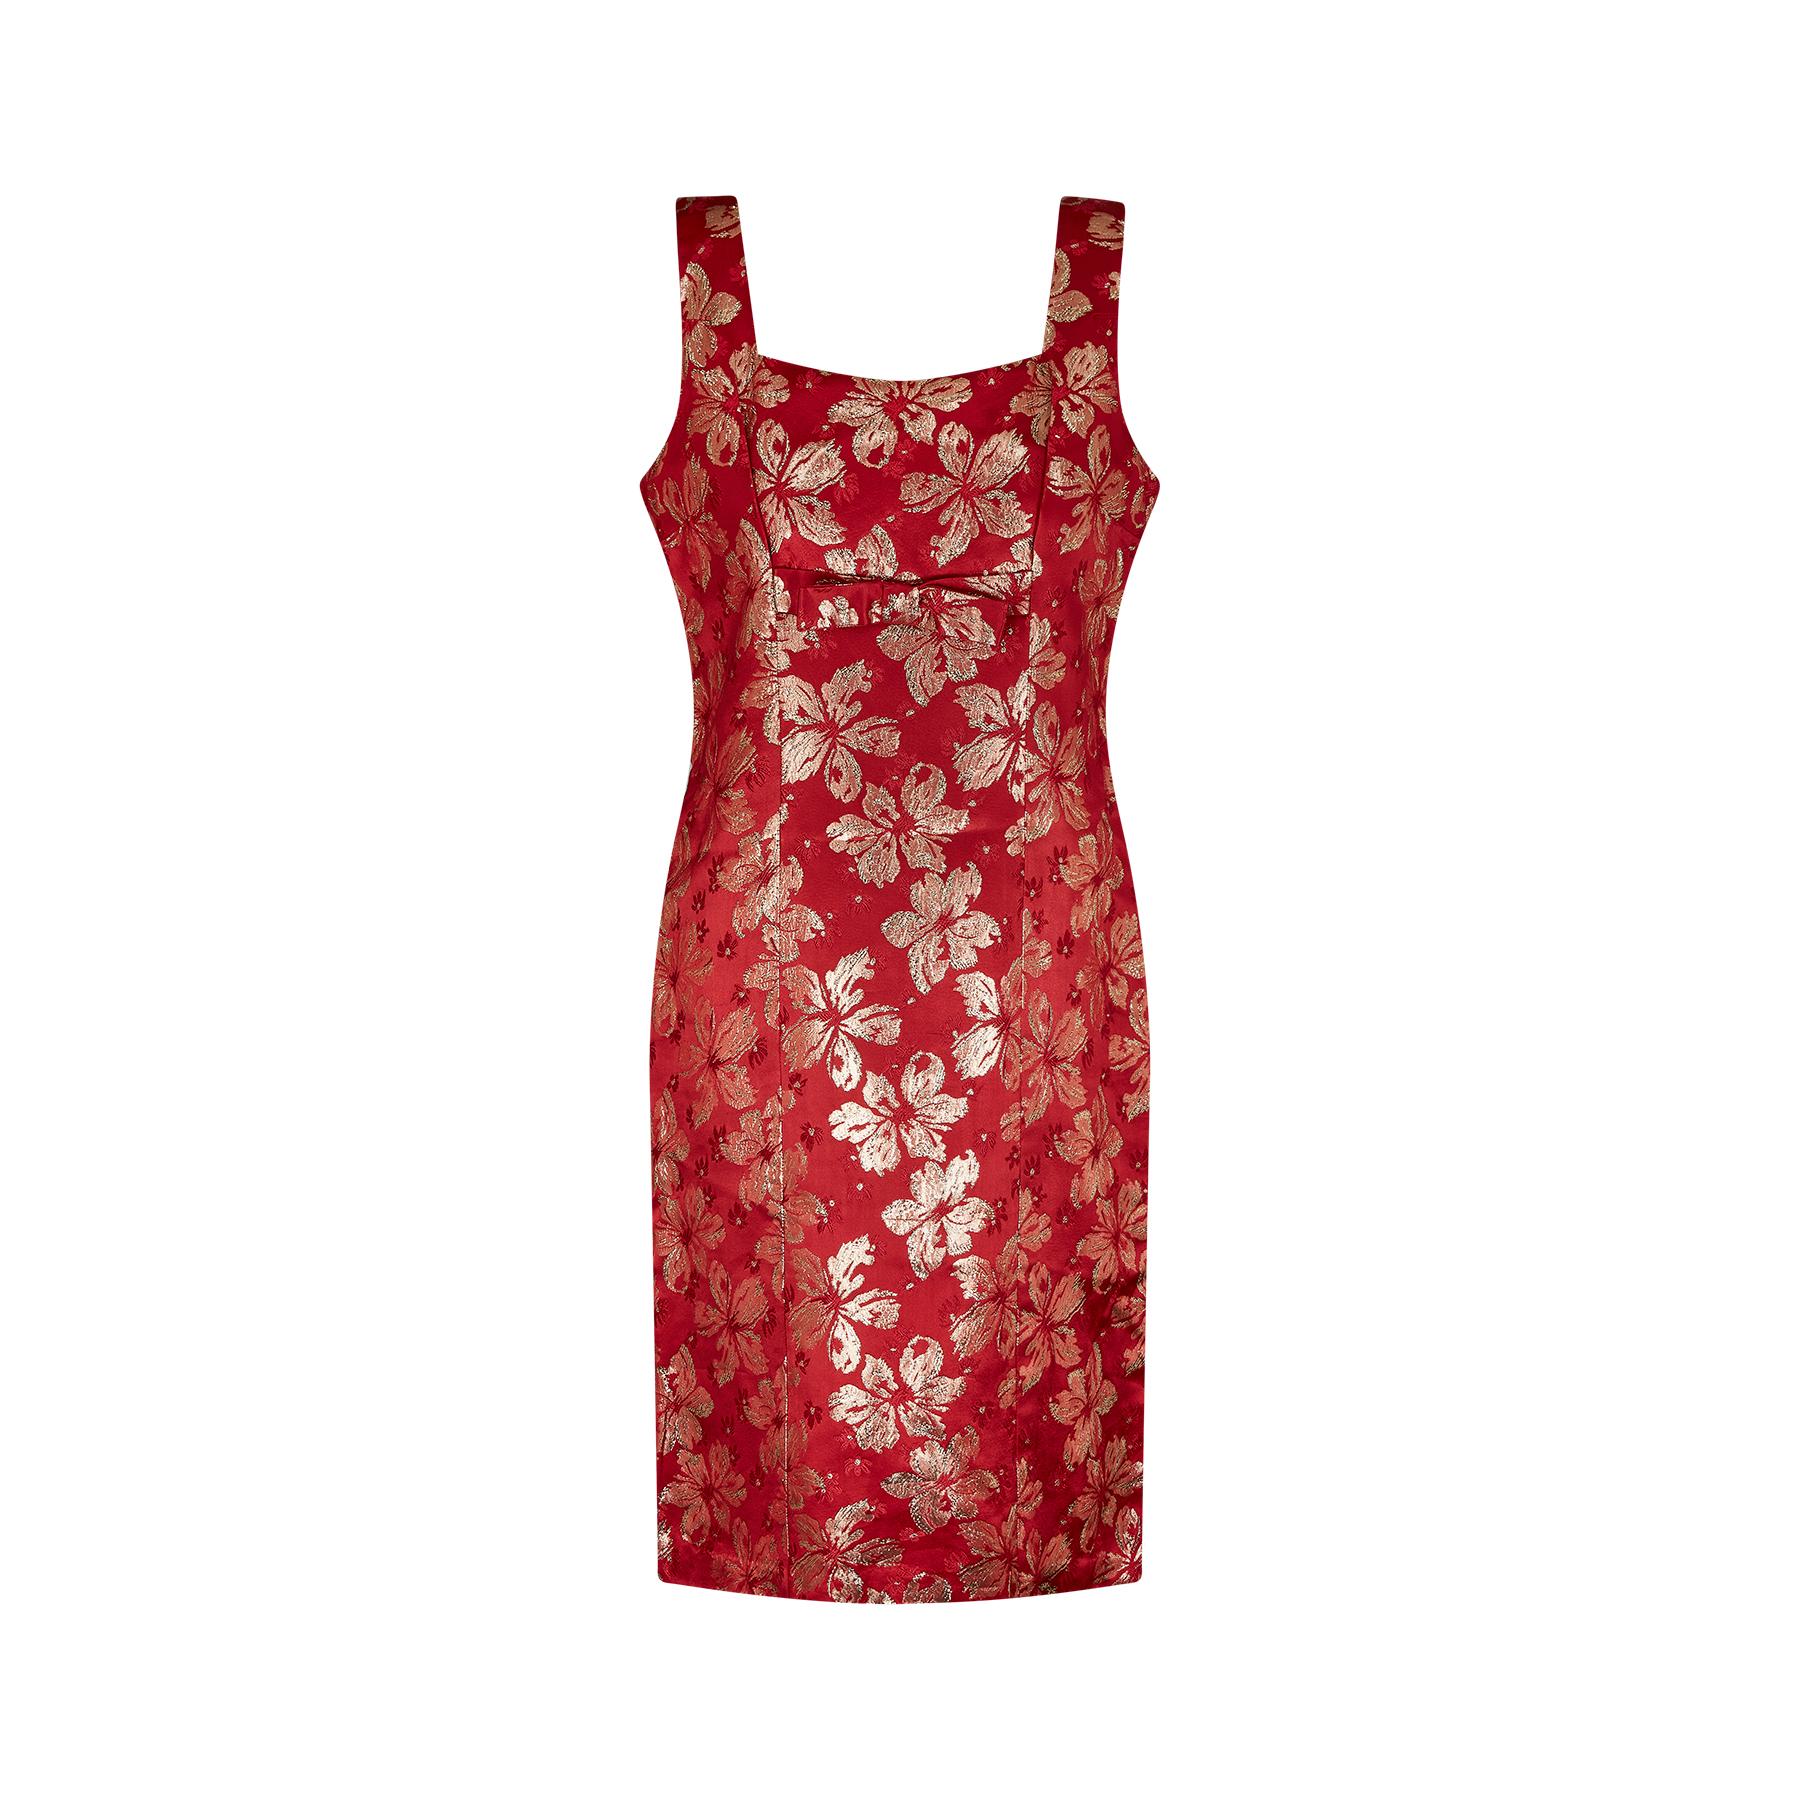 This is a perfect party or cocktail dress in a vivid red and gold medium weight brocade fabric. Dating from the 1960s this dress takes the classic shift style from that era with a high square neckline and thick straps. The bust line is adorned with